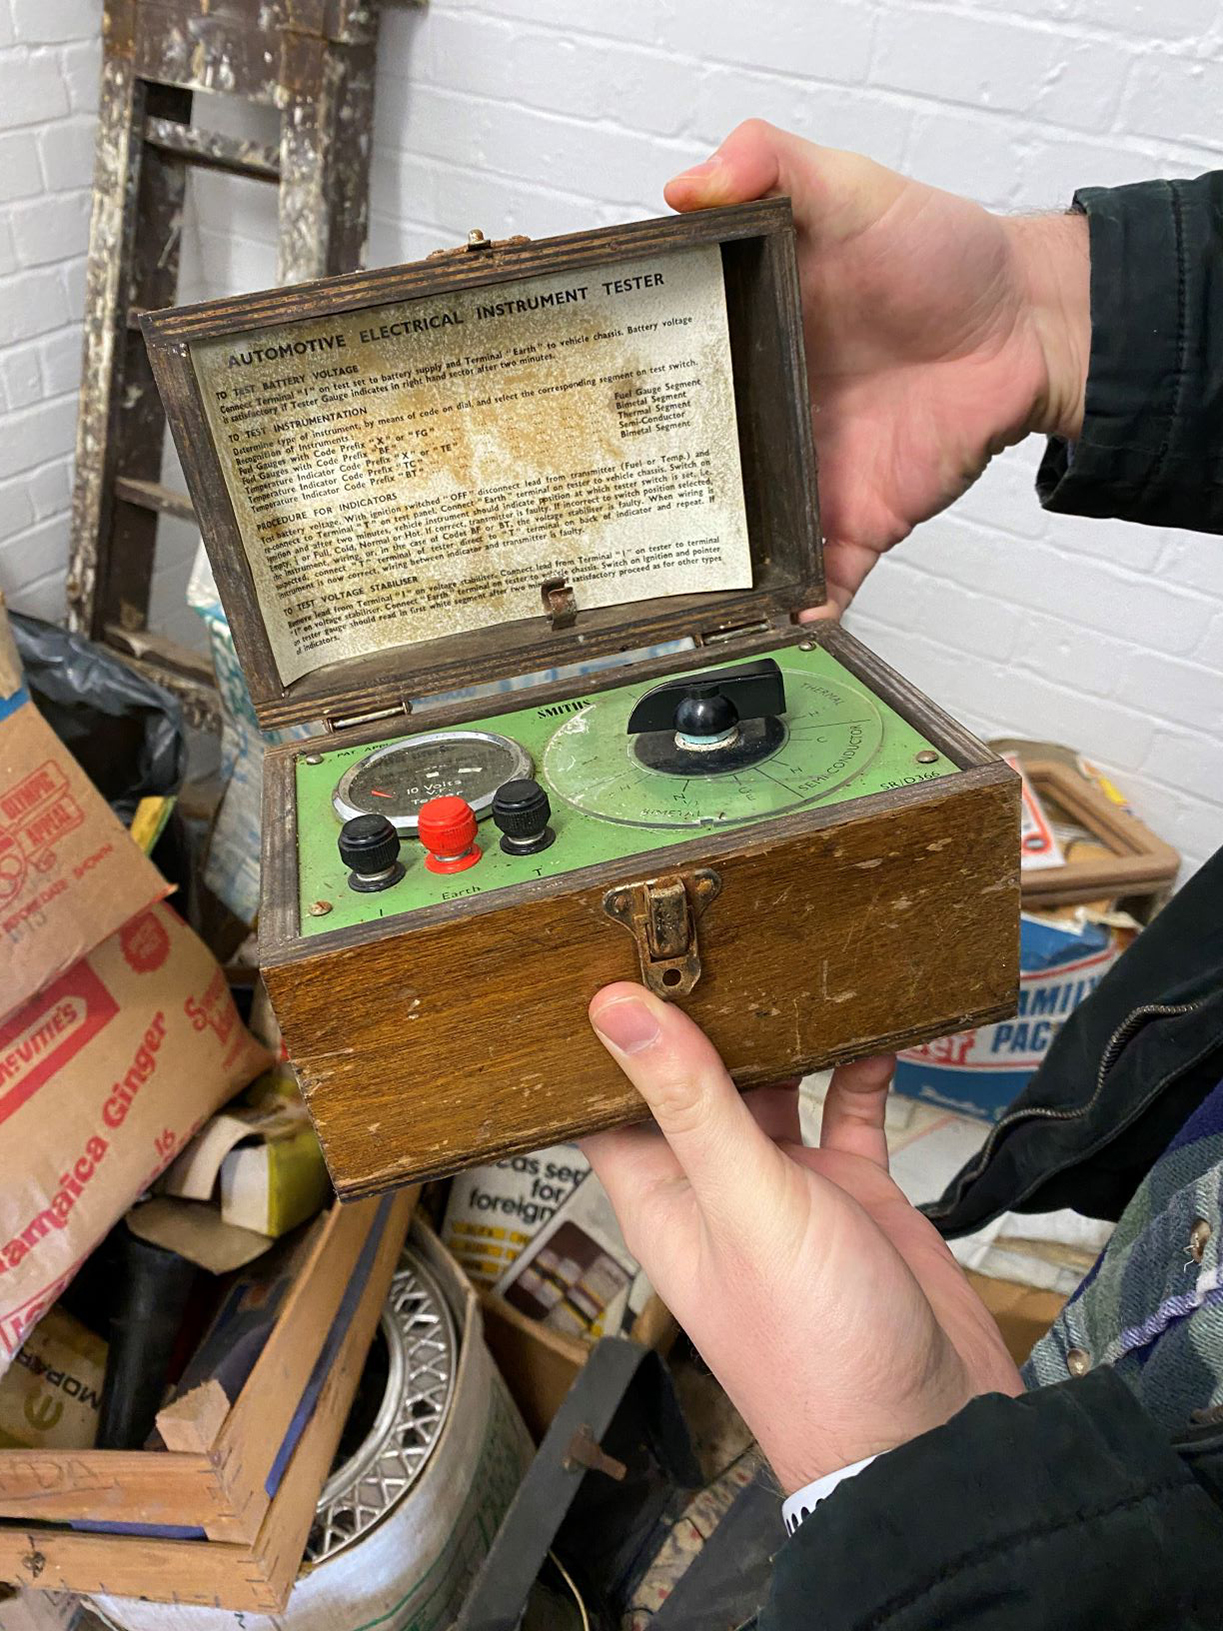 A 1950s ‘automotive electrical equipment tester’ was among the finds at Bishopstone Station in East Sussex